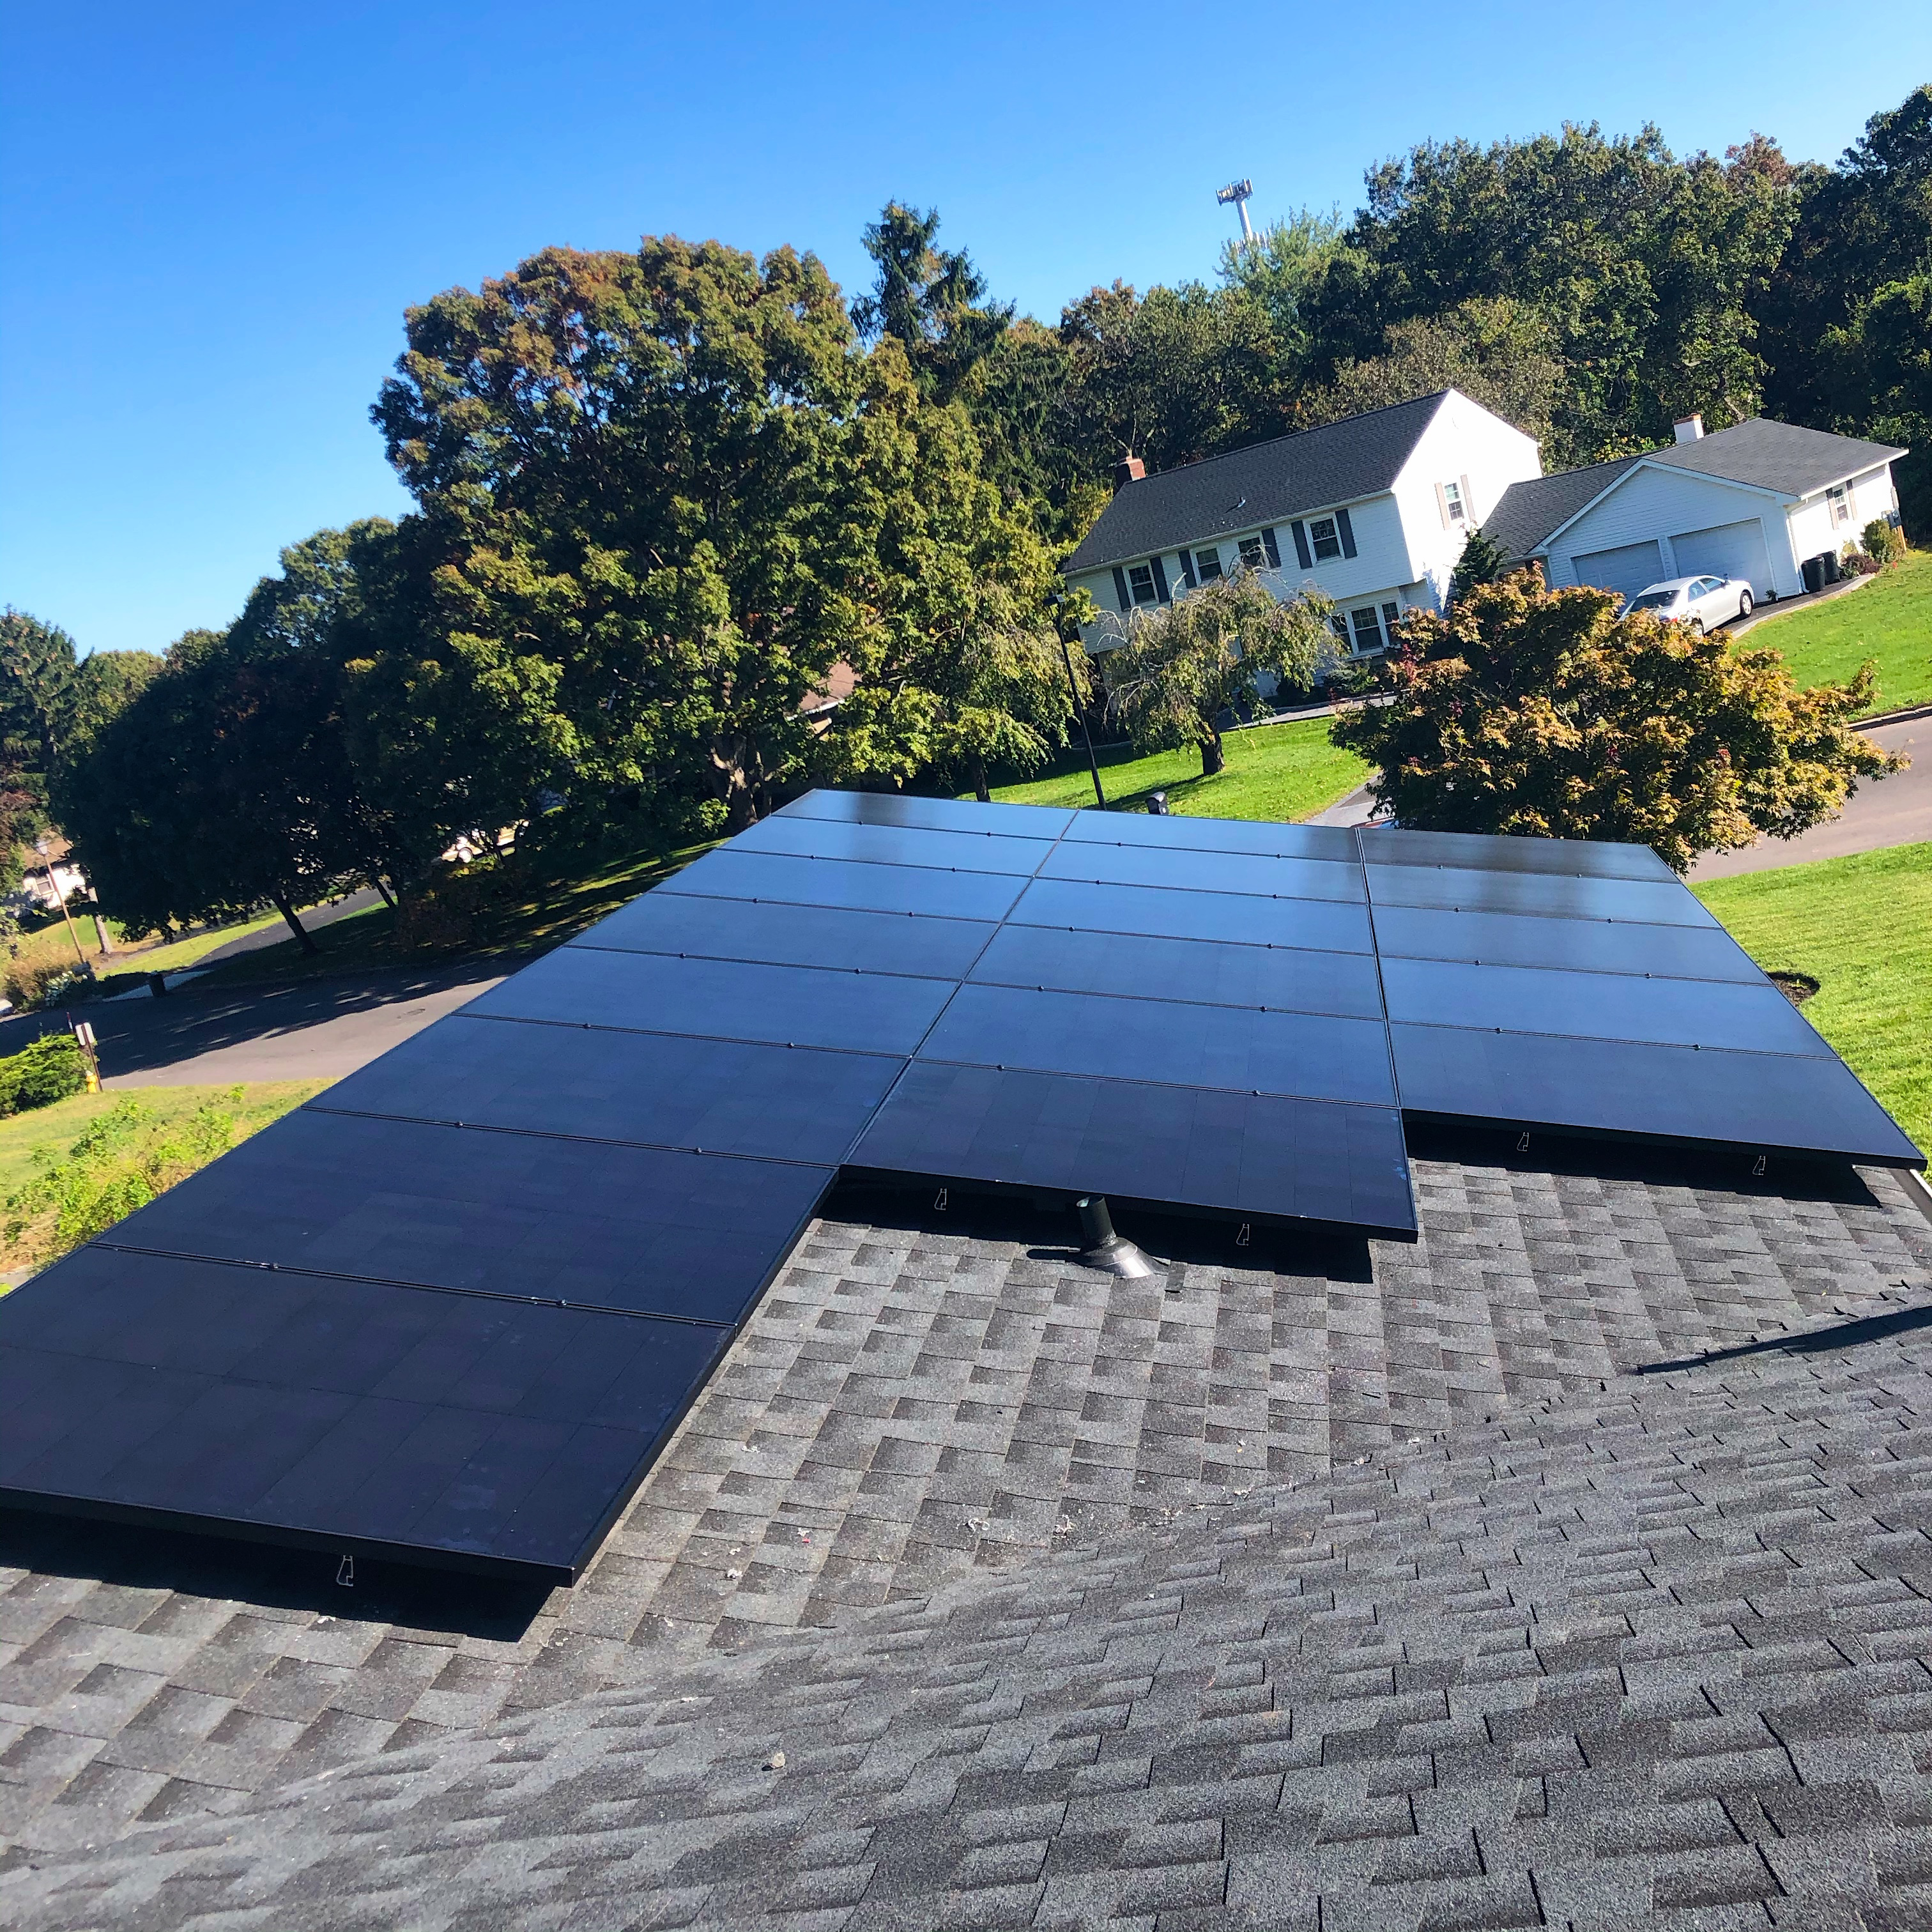 5 Reasons Why Long Island Homeowners Need to Go Solar In 2020